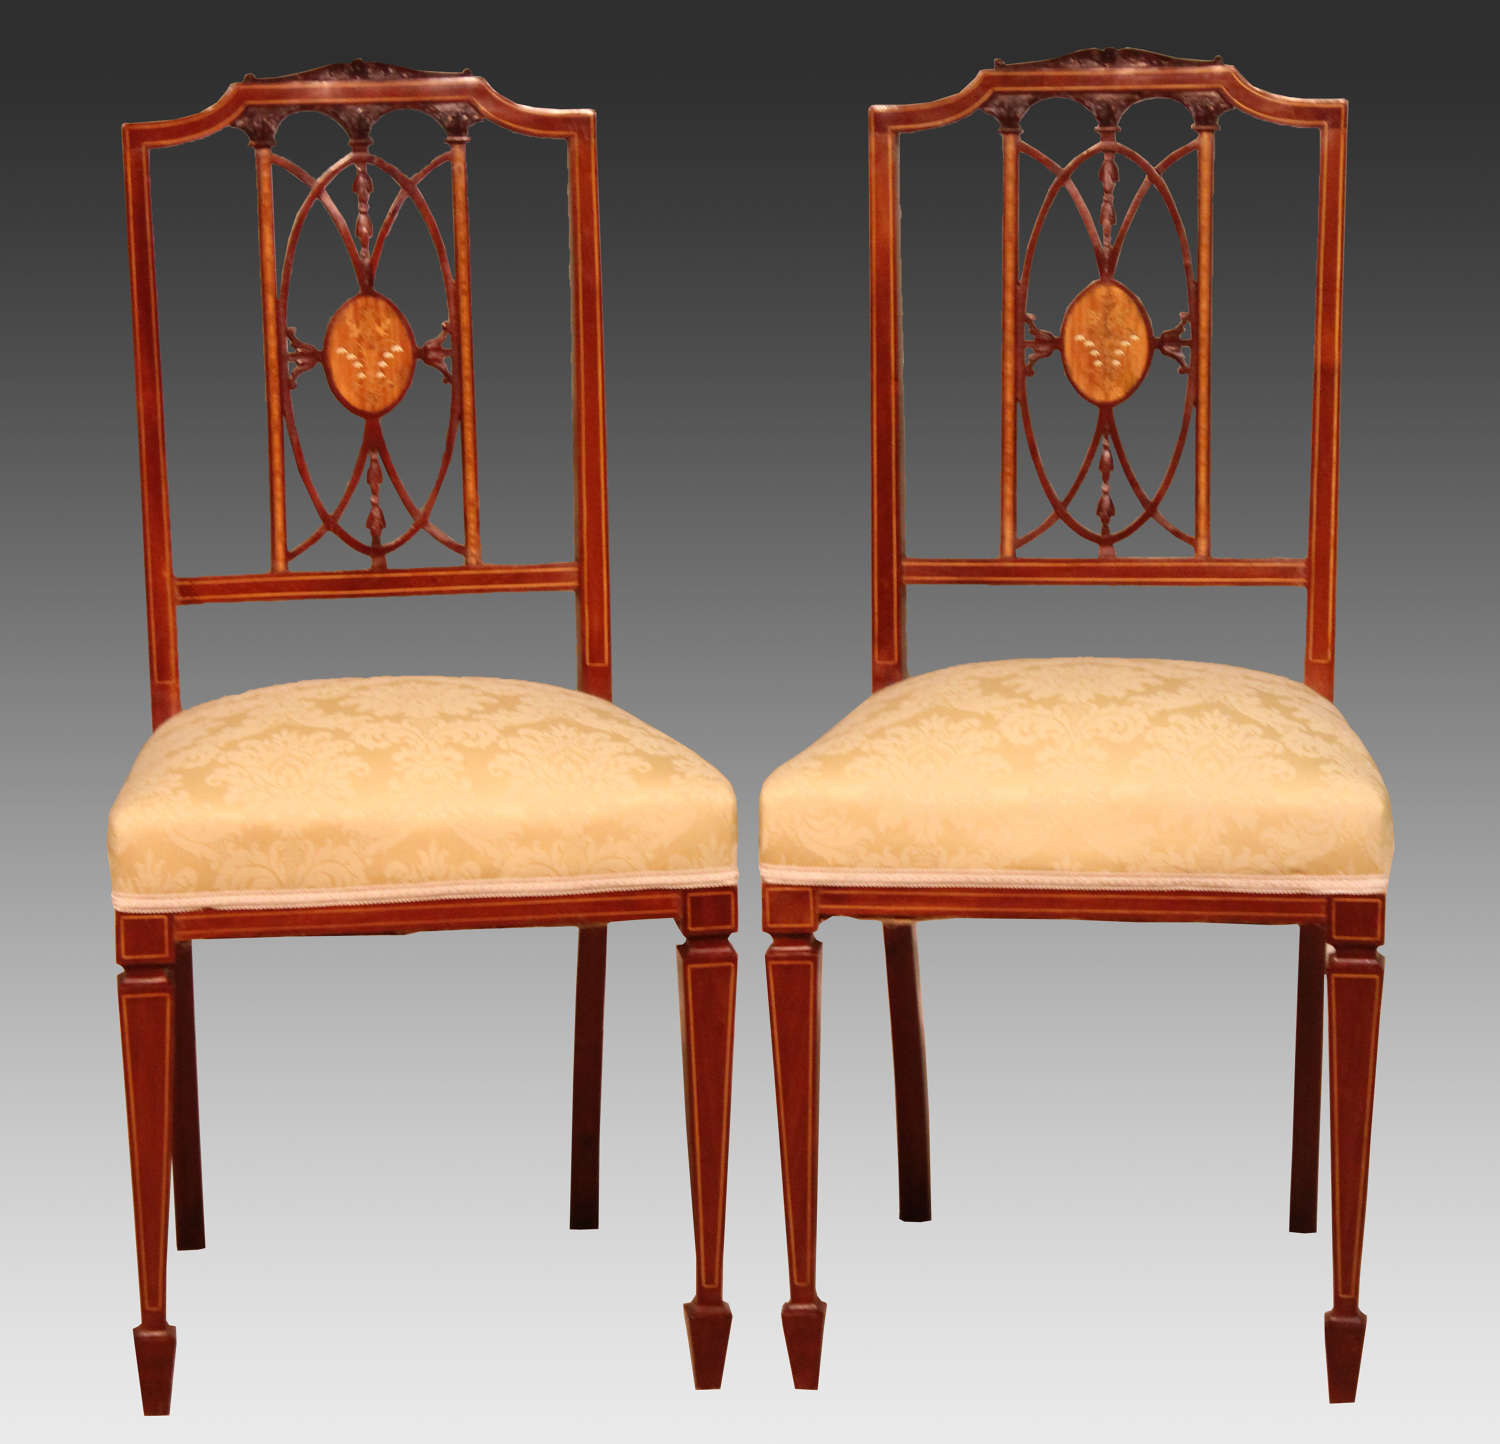 The Quality Late Victorian Mahogany Inlaid Pair of Chairs